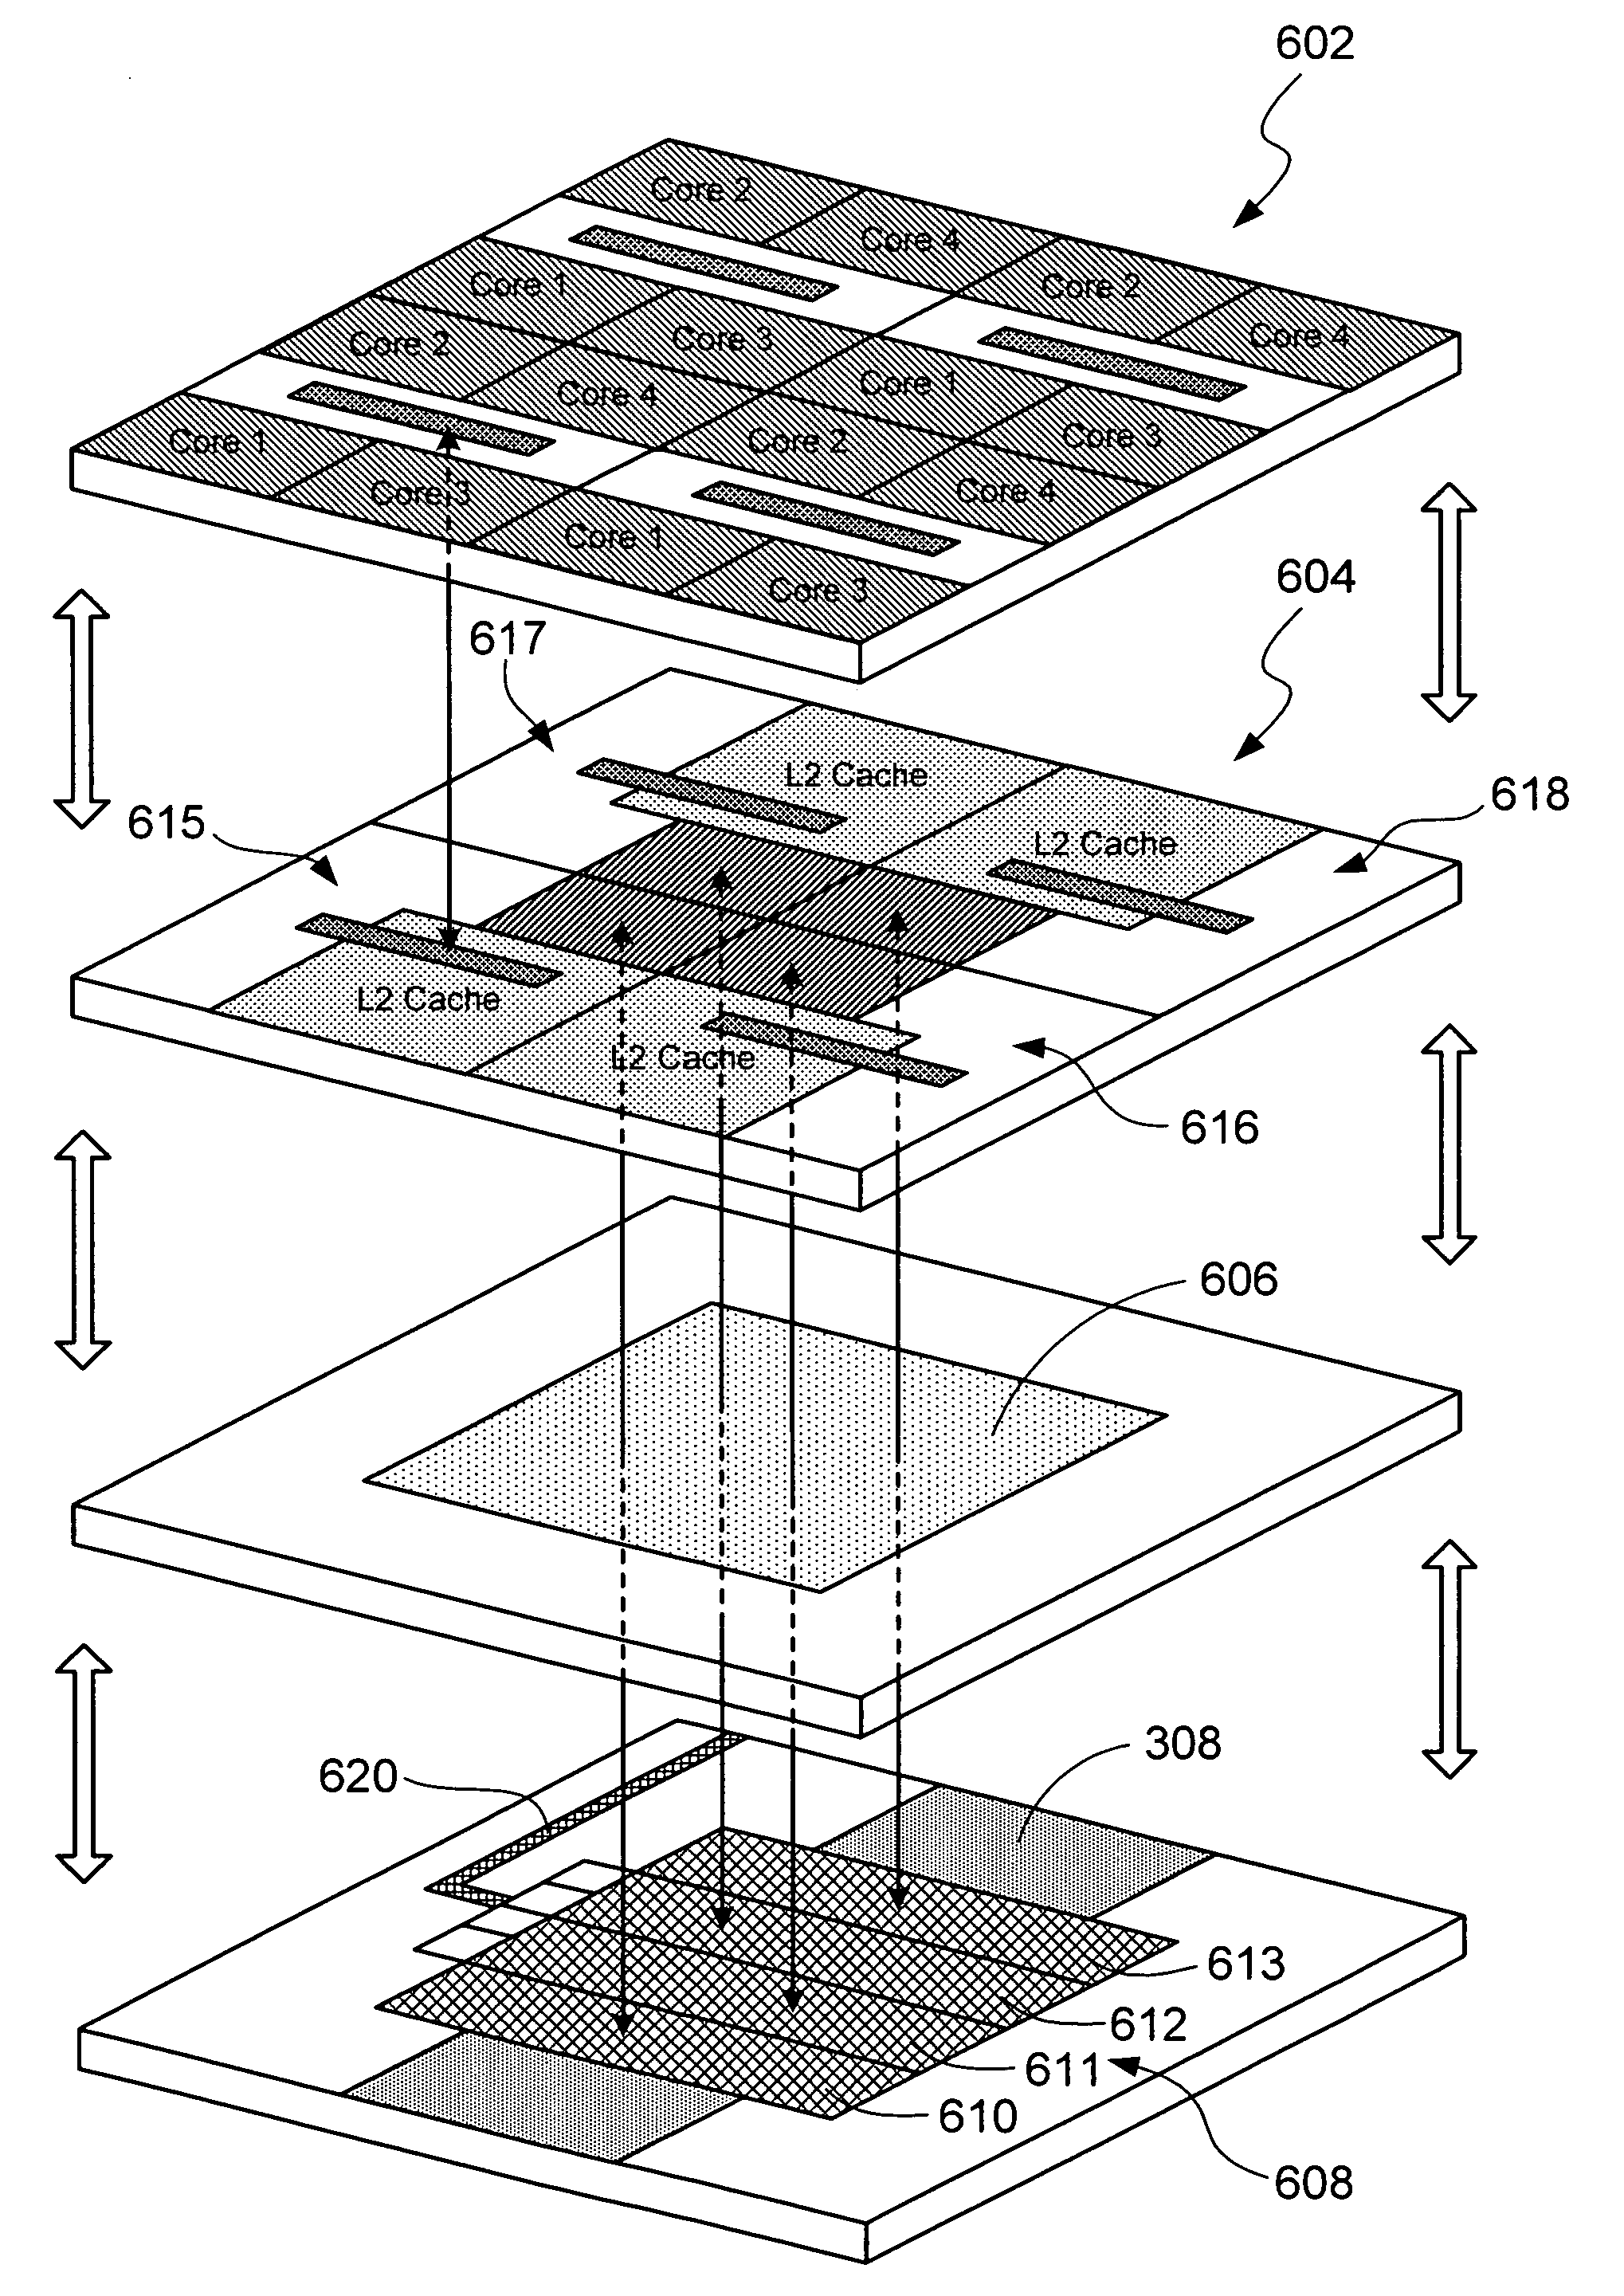 Three-dimensional die stacks with inter-device and intra-device optical interconnect